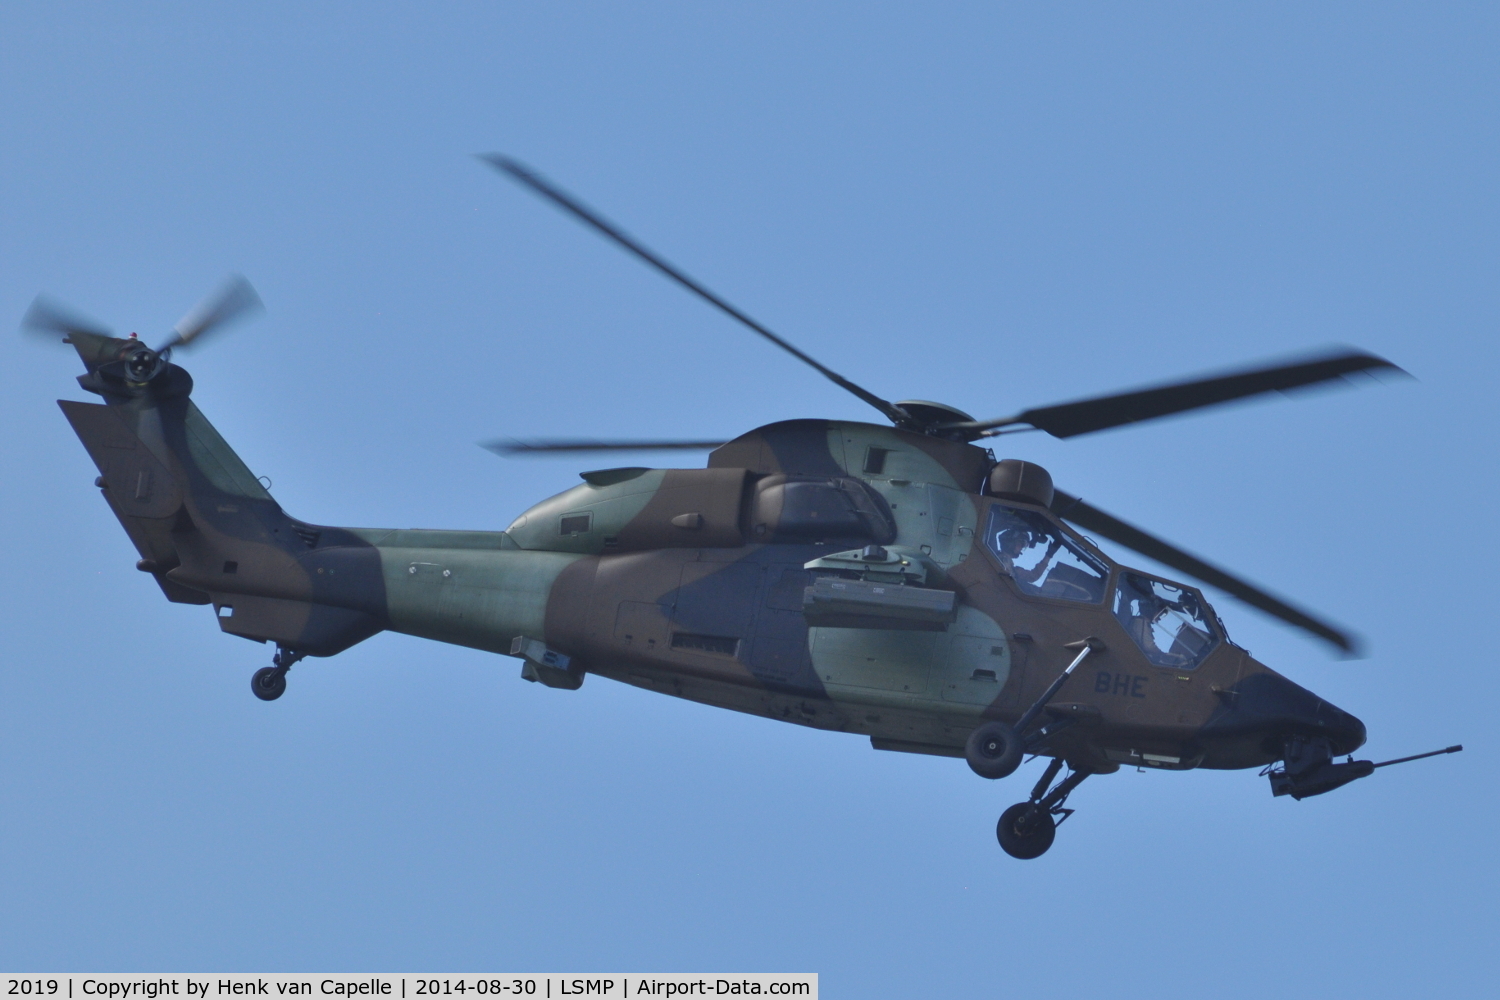 2019, Eurocopter EC-665 Tigre HAP C/N 2019, Eurocopter Tigre attack helicopter of the French Army at Payerne Air Base, Switzerland.